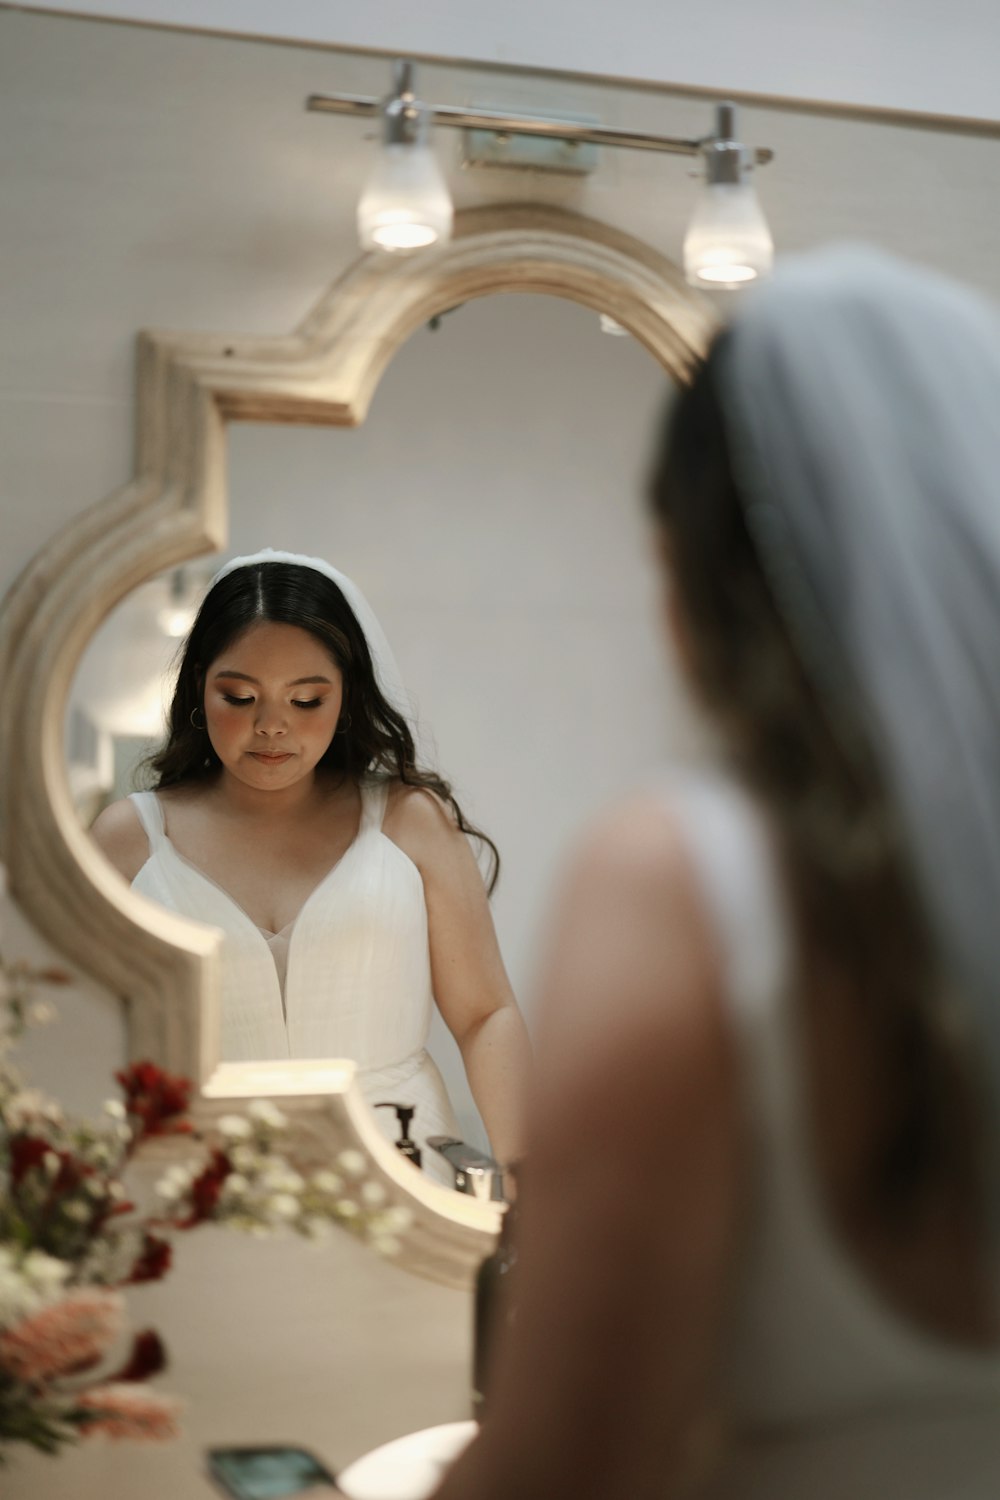 a woman in a wedding dress looking at her reflection in a mirror